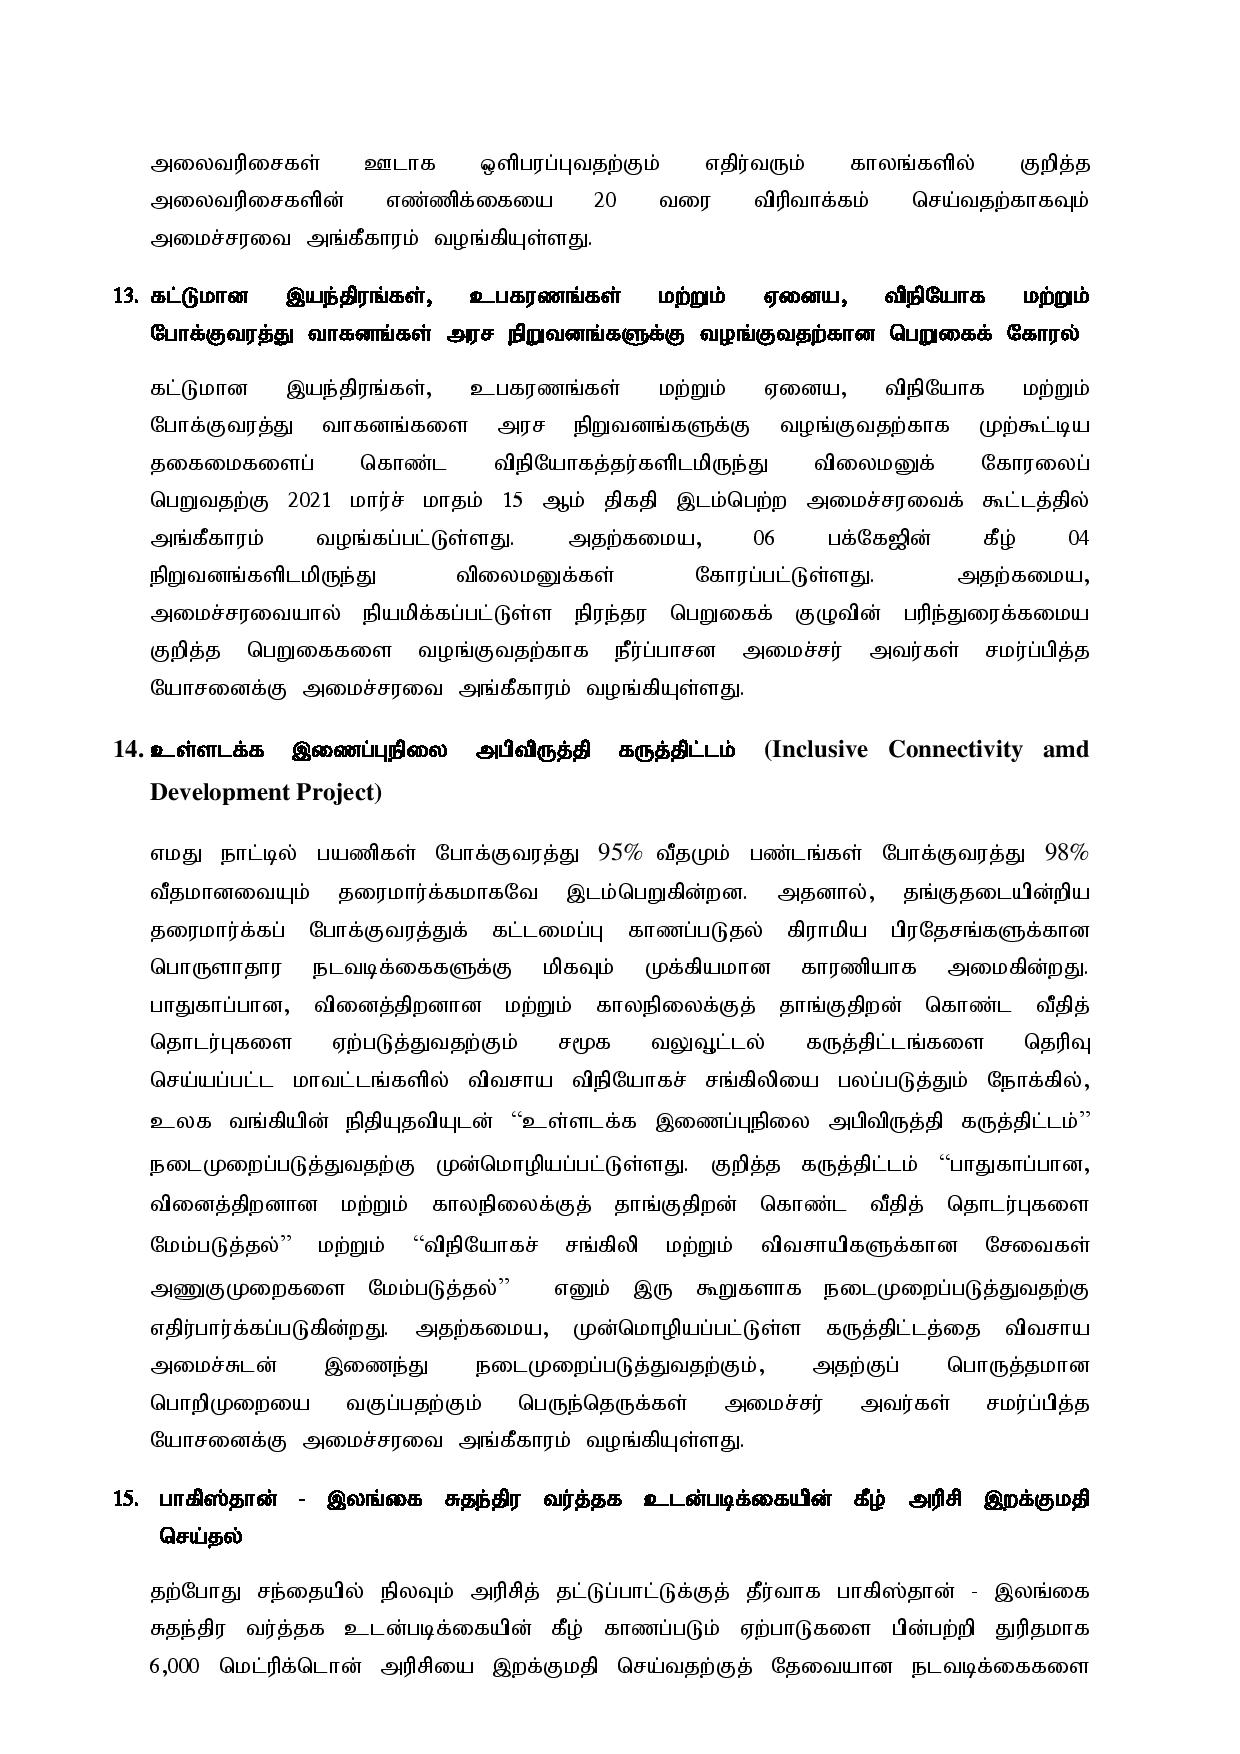 Cabinet Decision on 17.08.2021 Tamil page 006